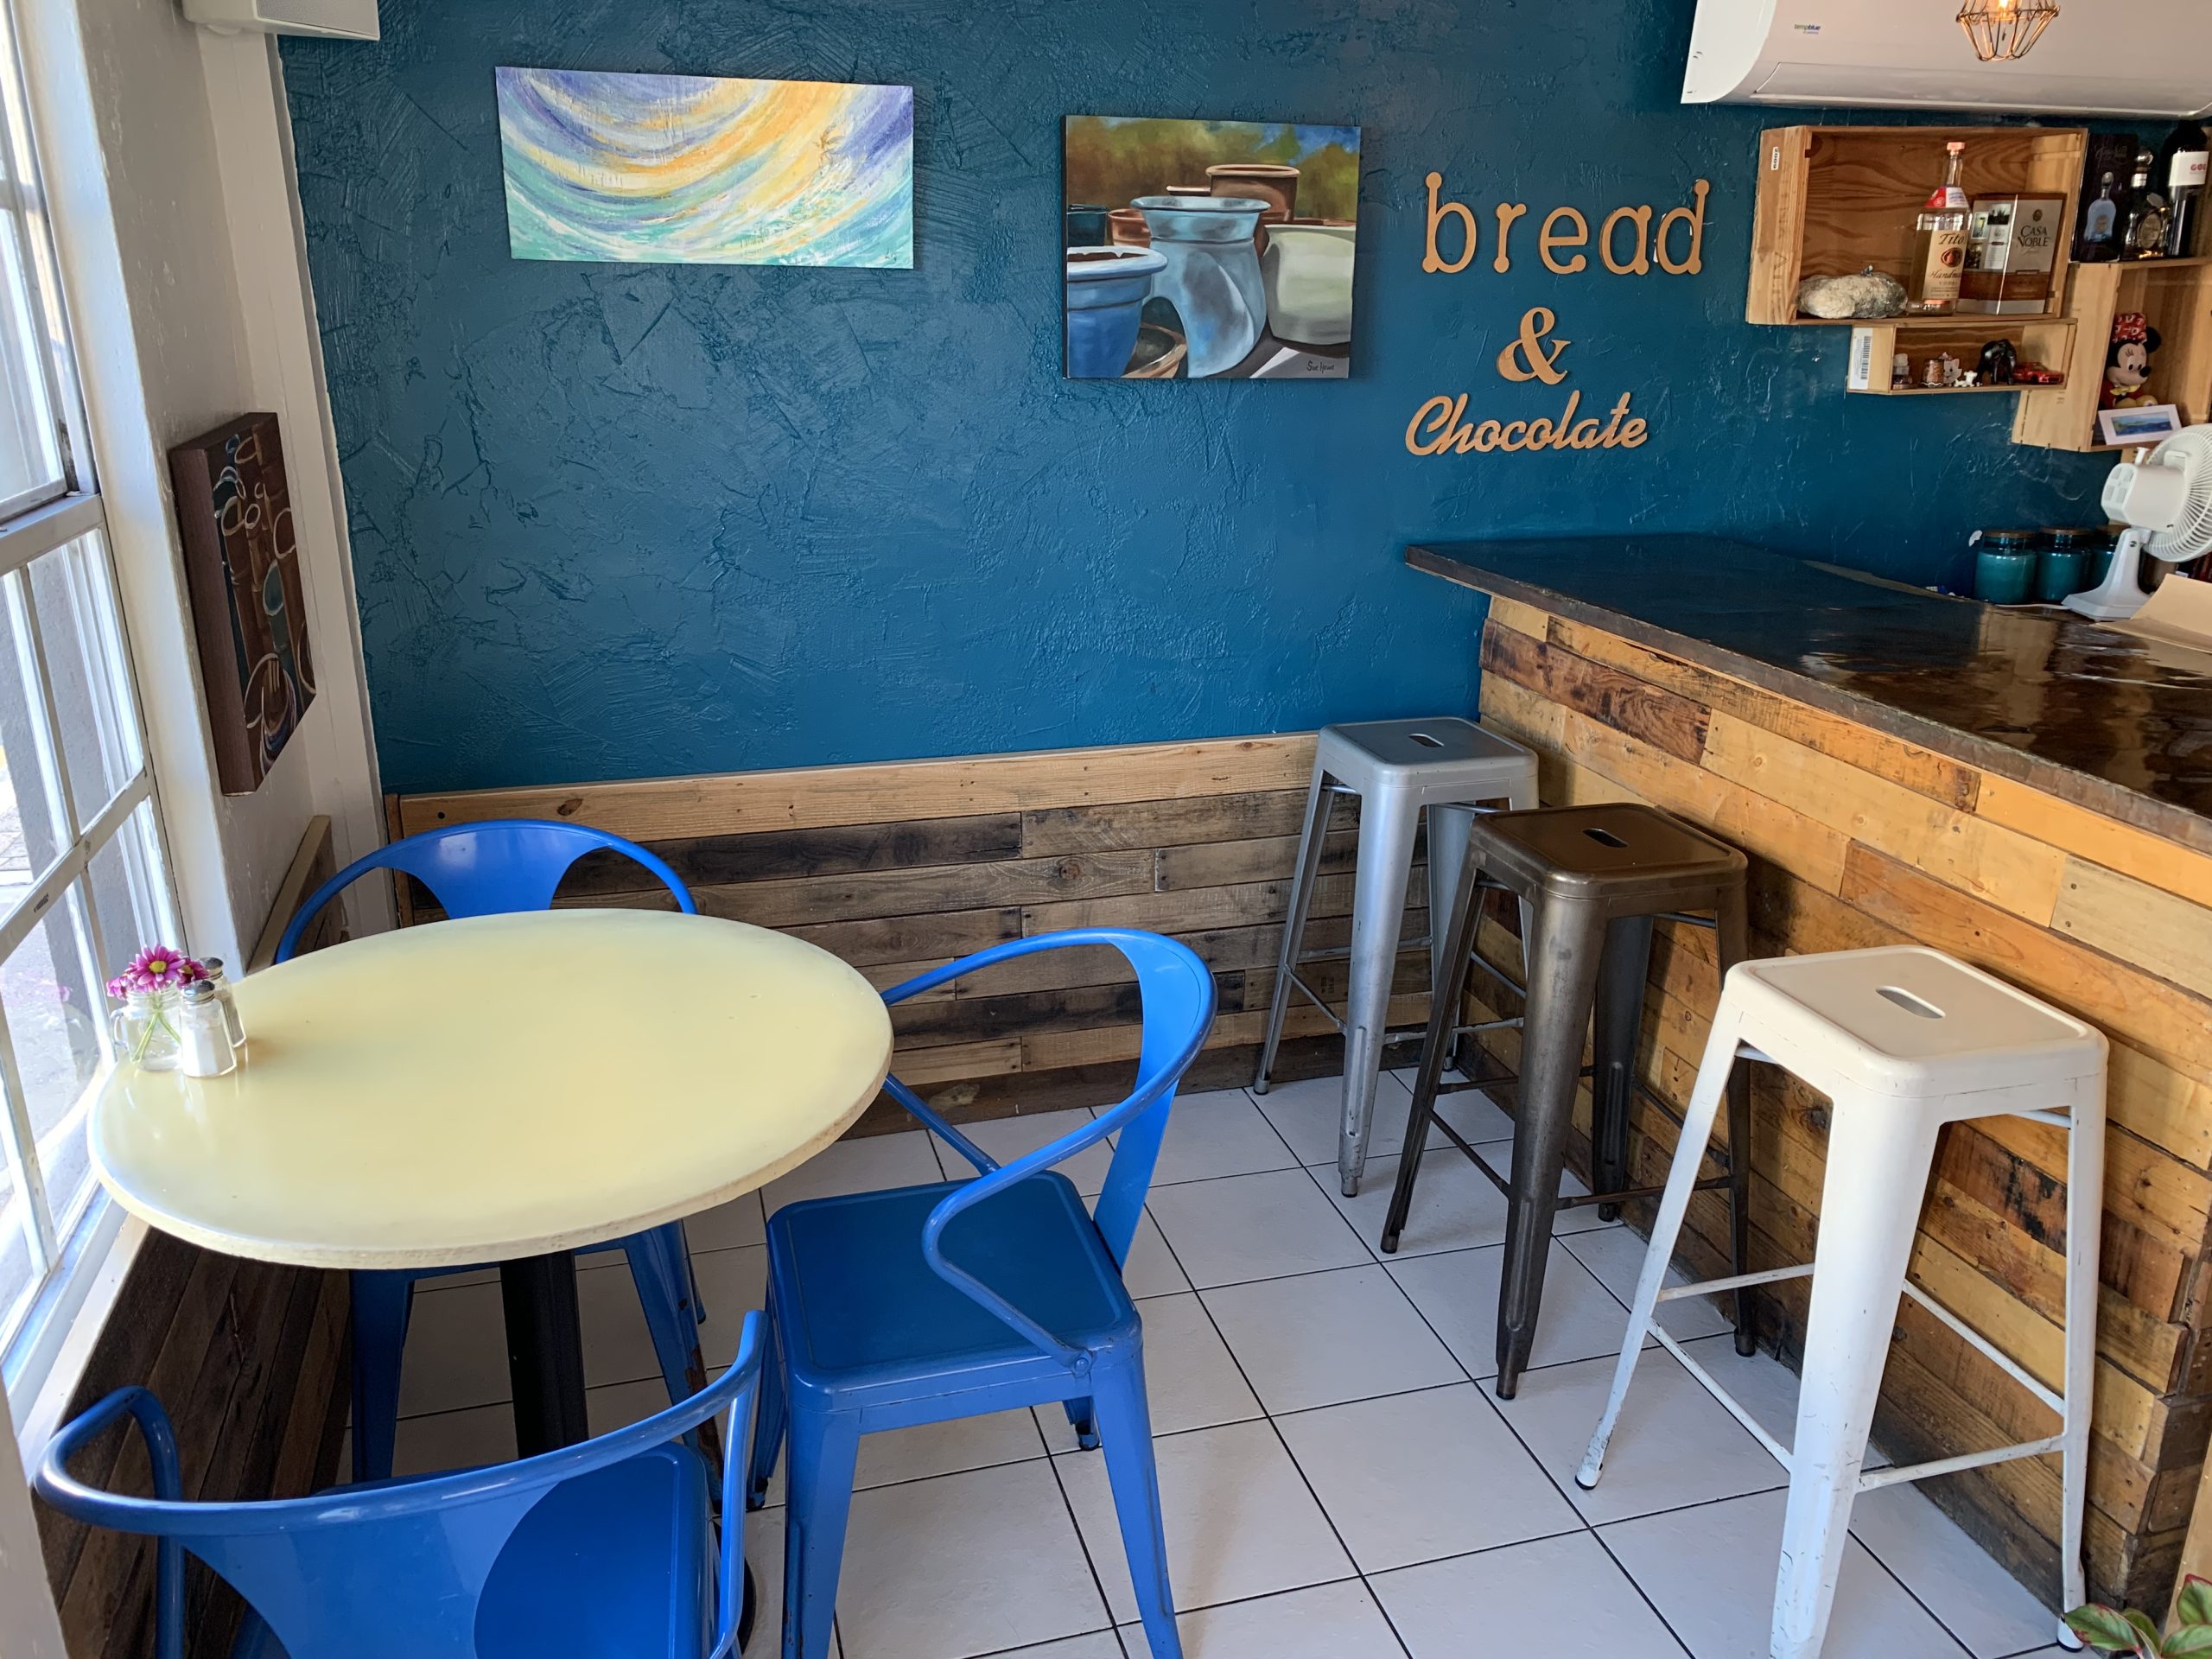 Bread & Chocolate: Cayman’s first and only dedicated vegan restaurant